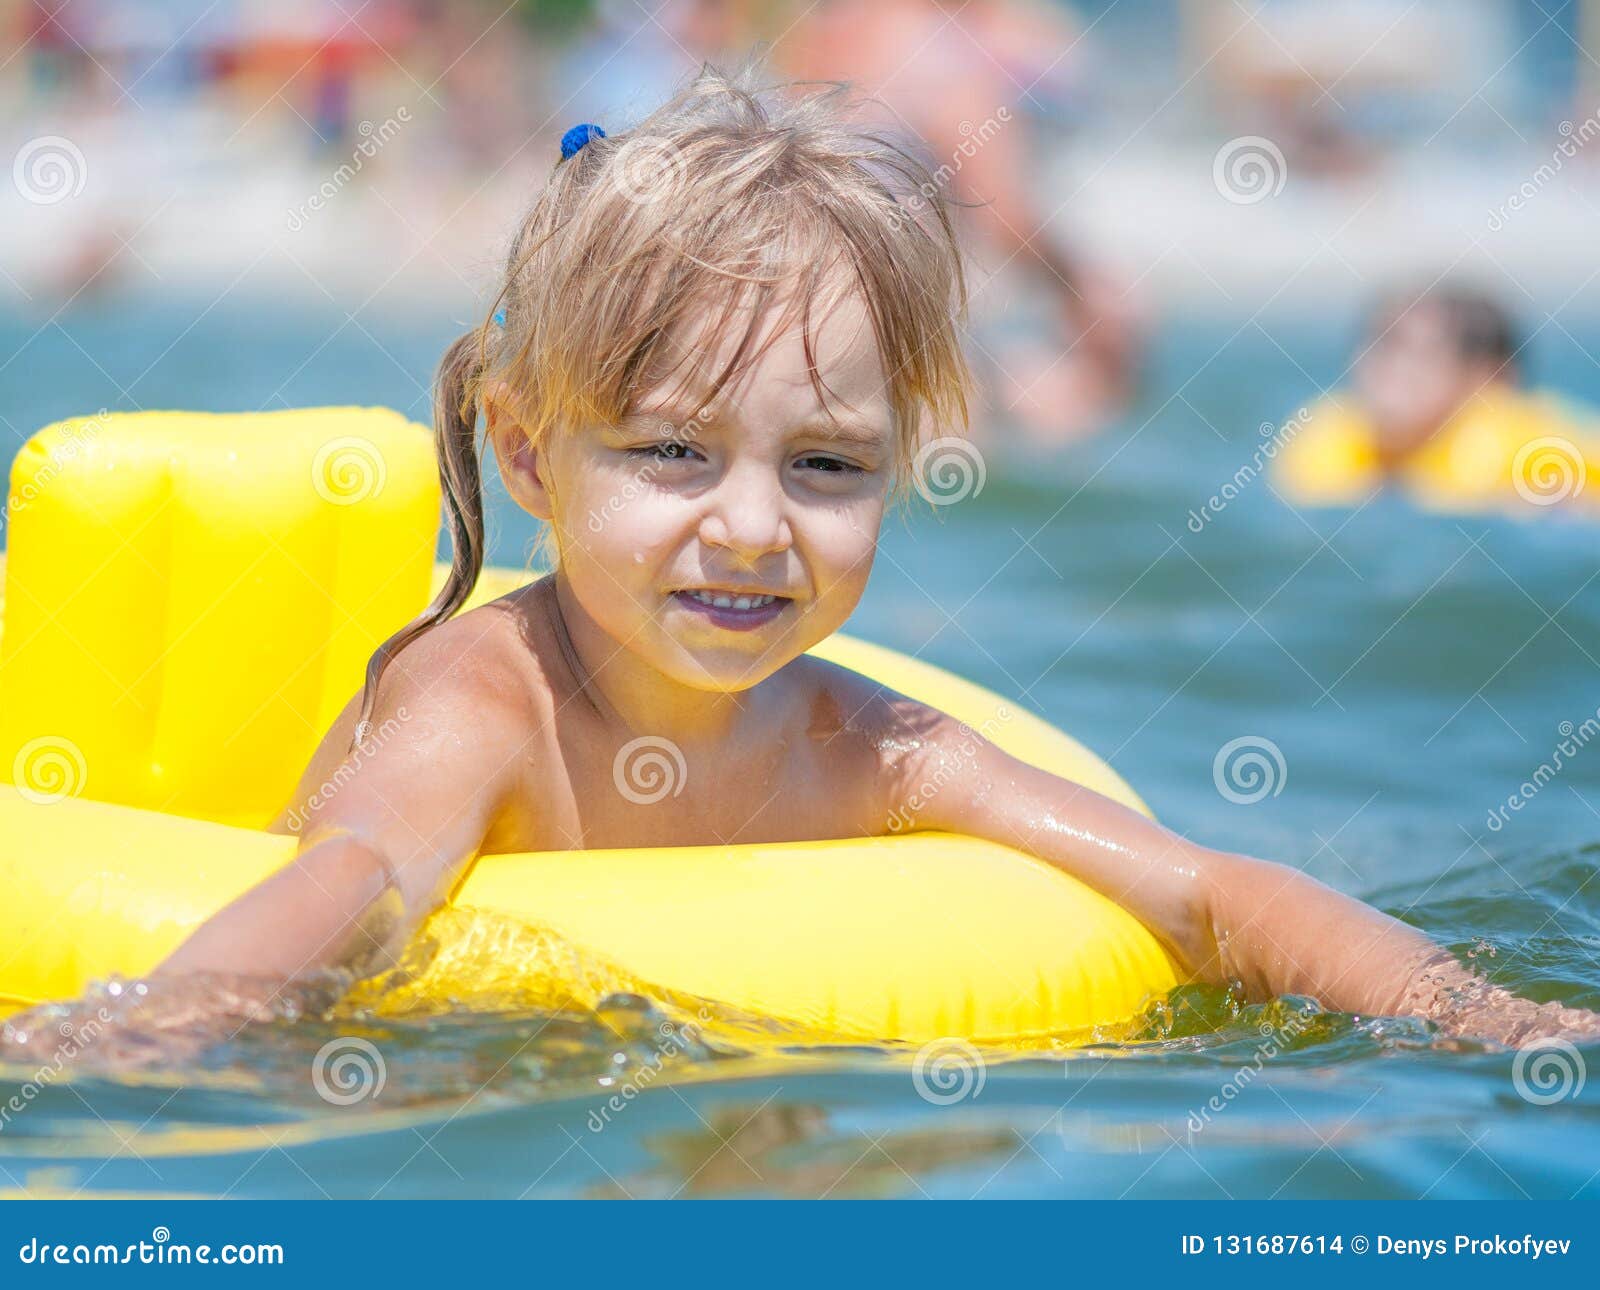 Little girl in sea stock photo. Image of adorable, cheerful - 131687614